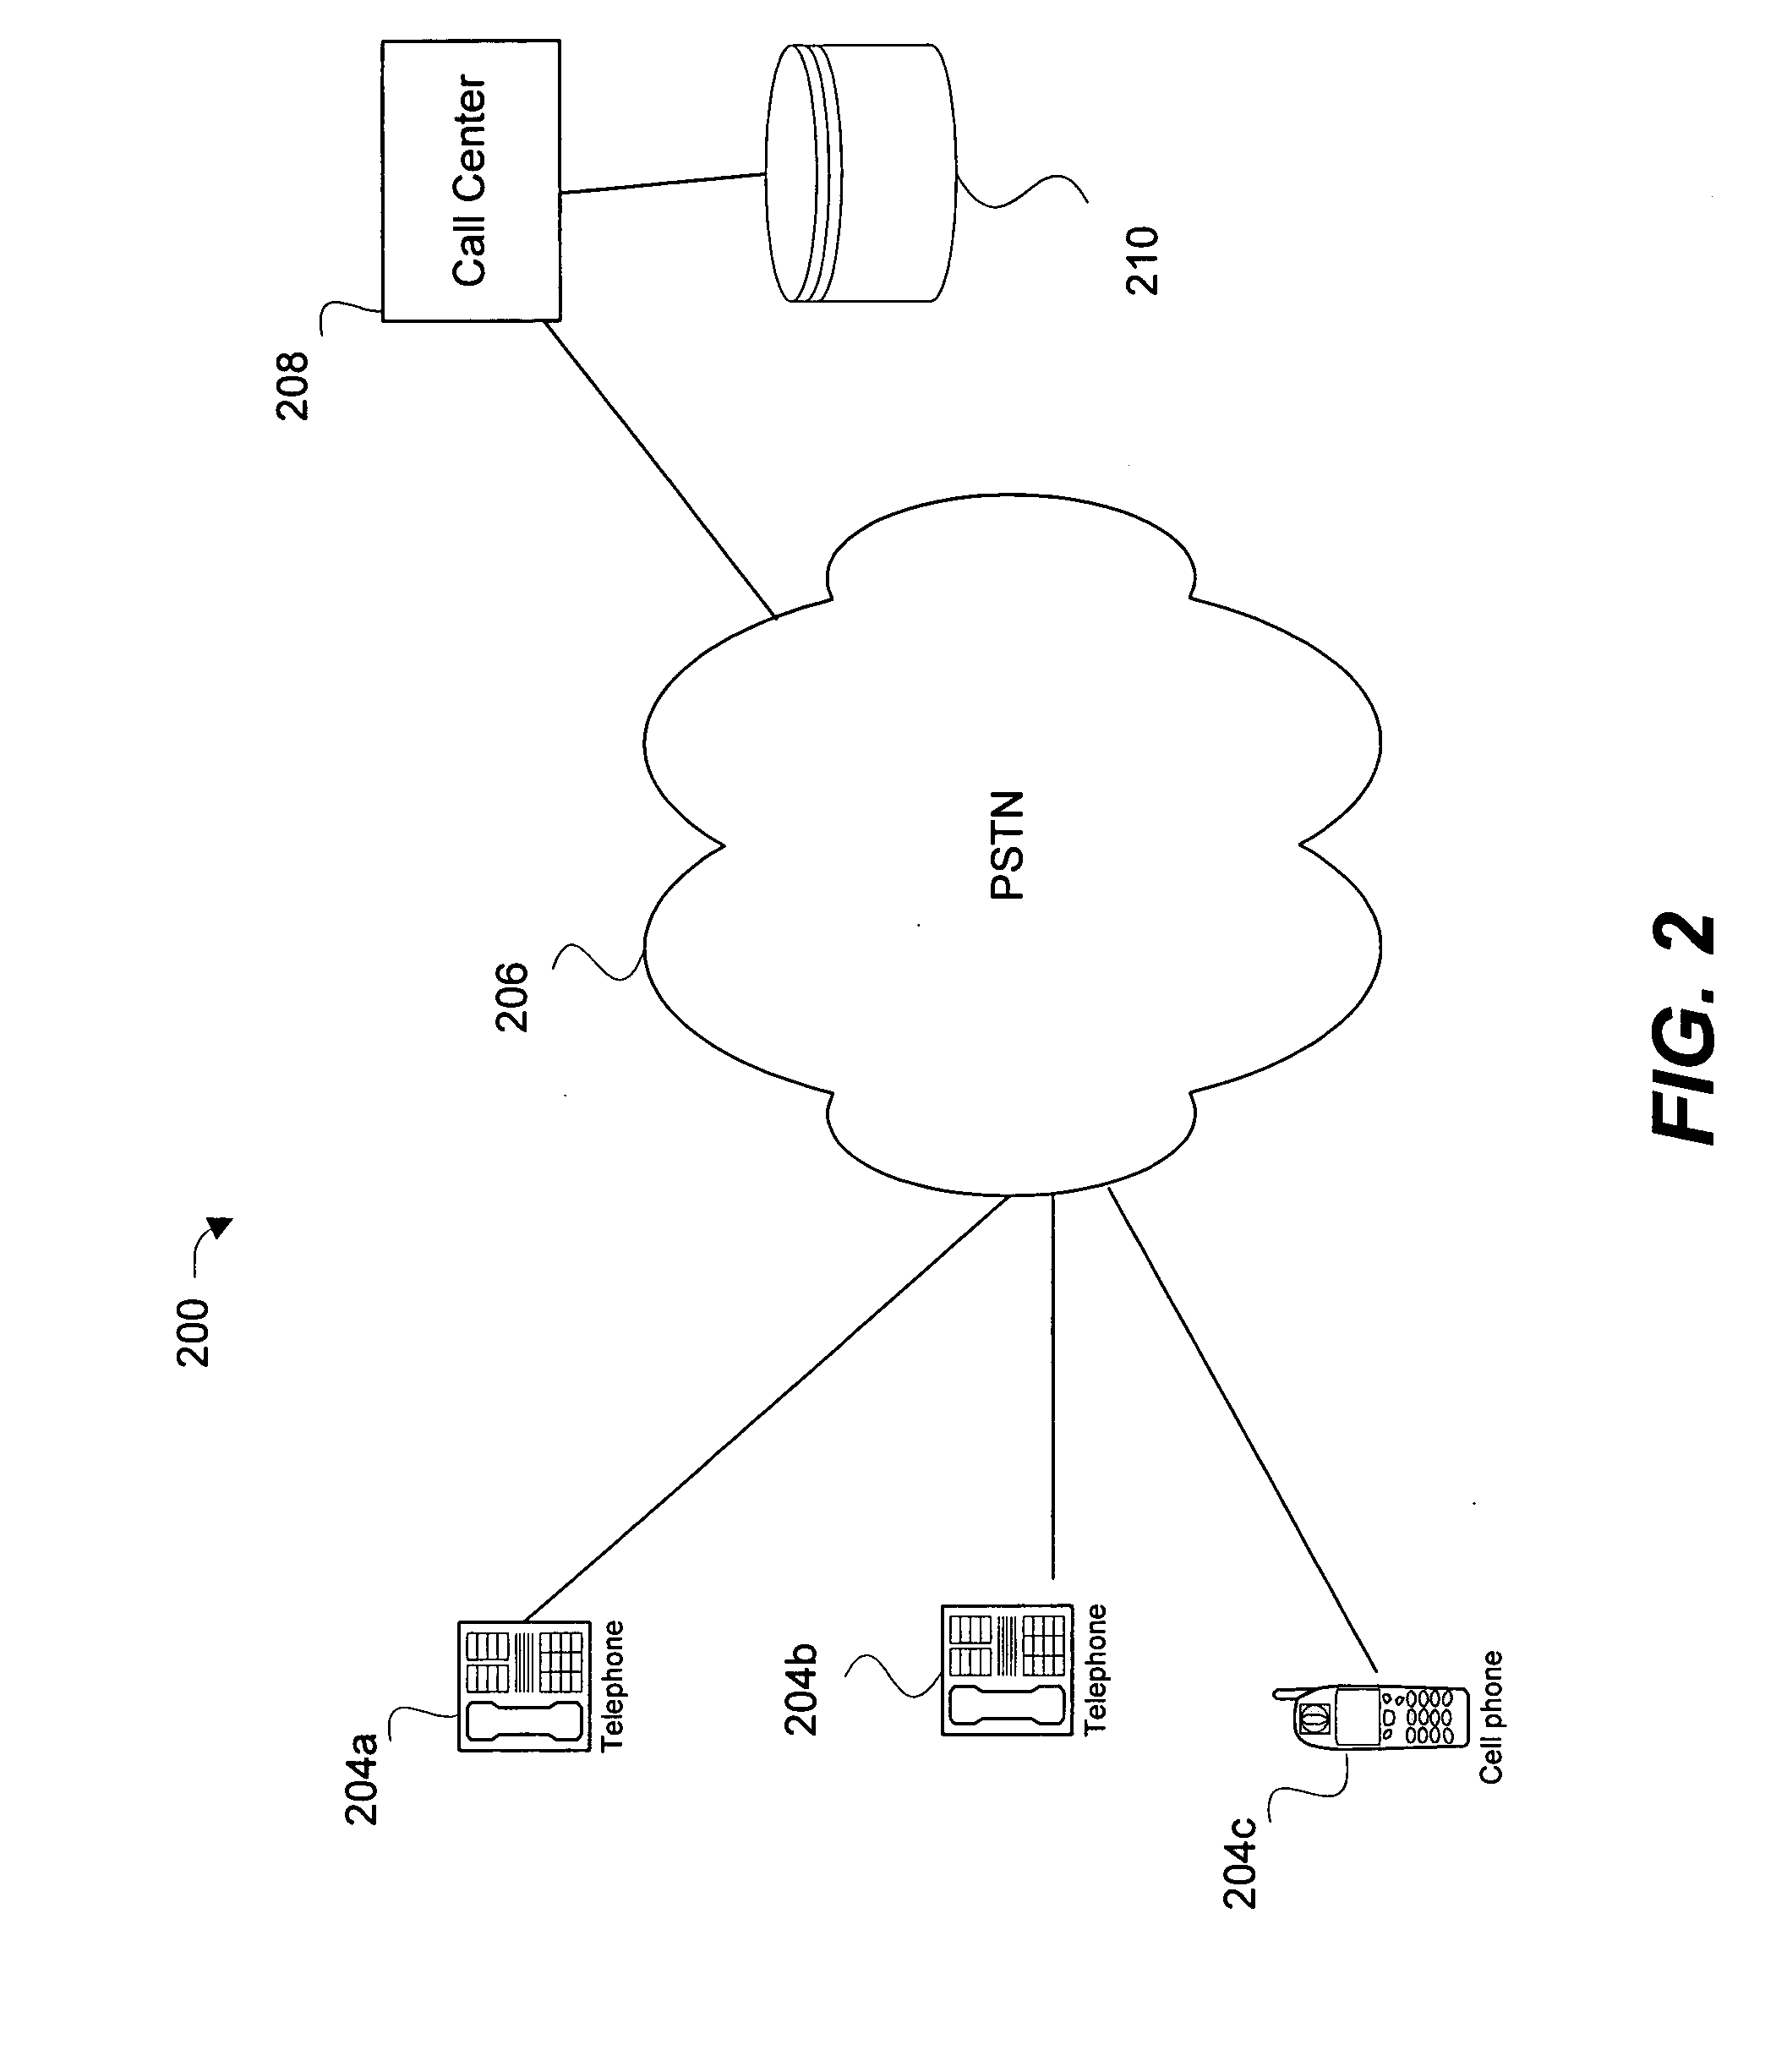 Method and apparatus for determining expected values in the presence of uncertainty